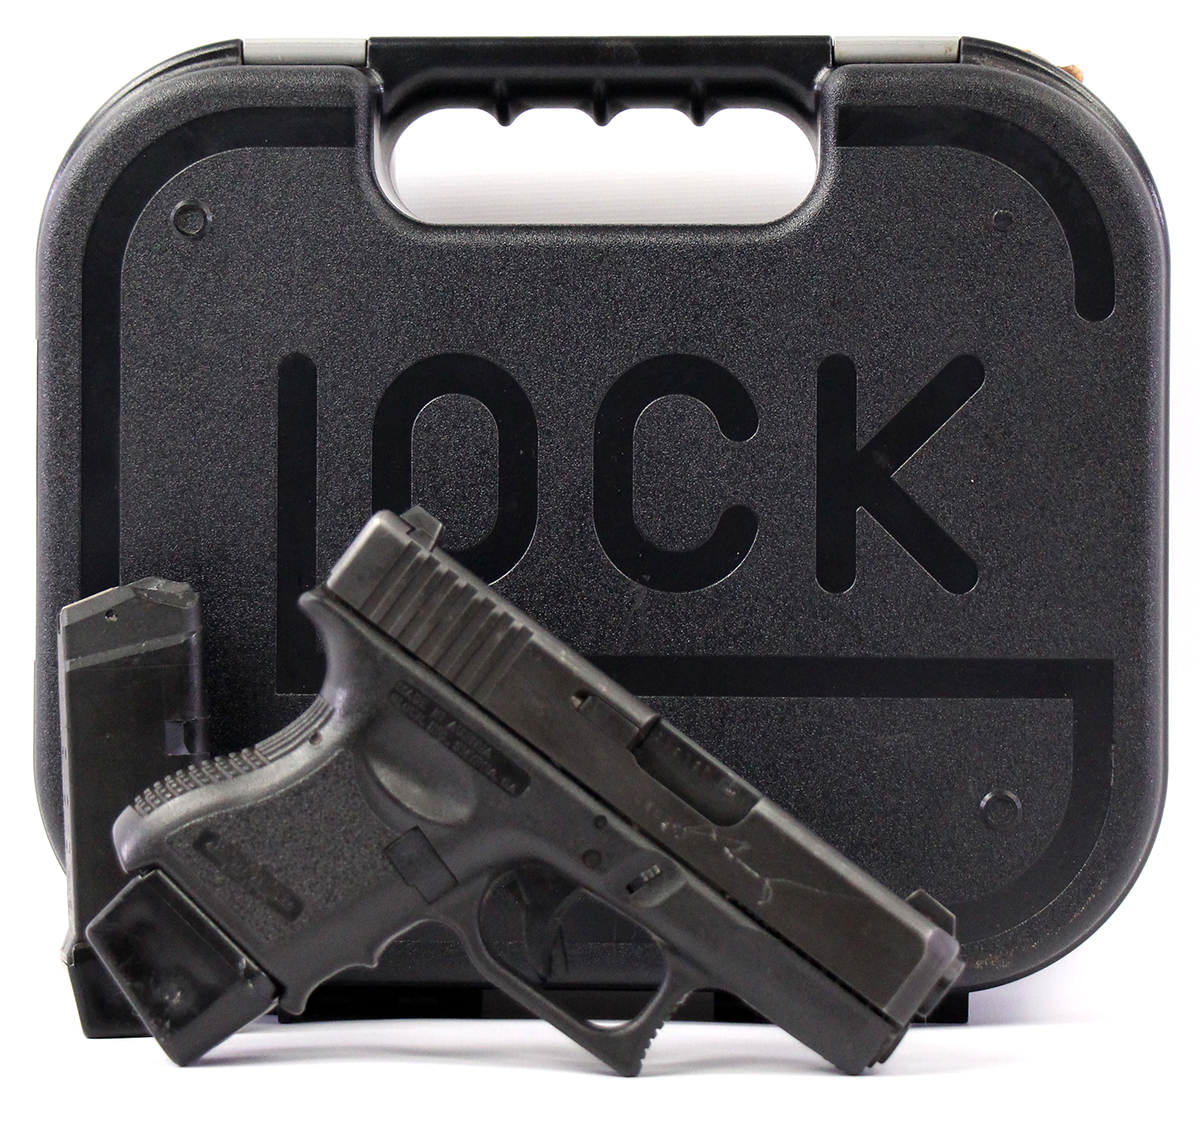 Glock 27 Gen3 40 S&W Pistol - Used in Good Condition with Box *Night Sights*